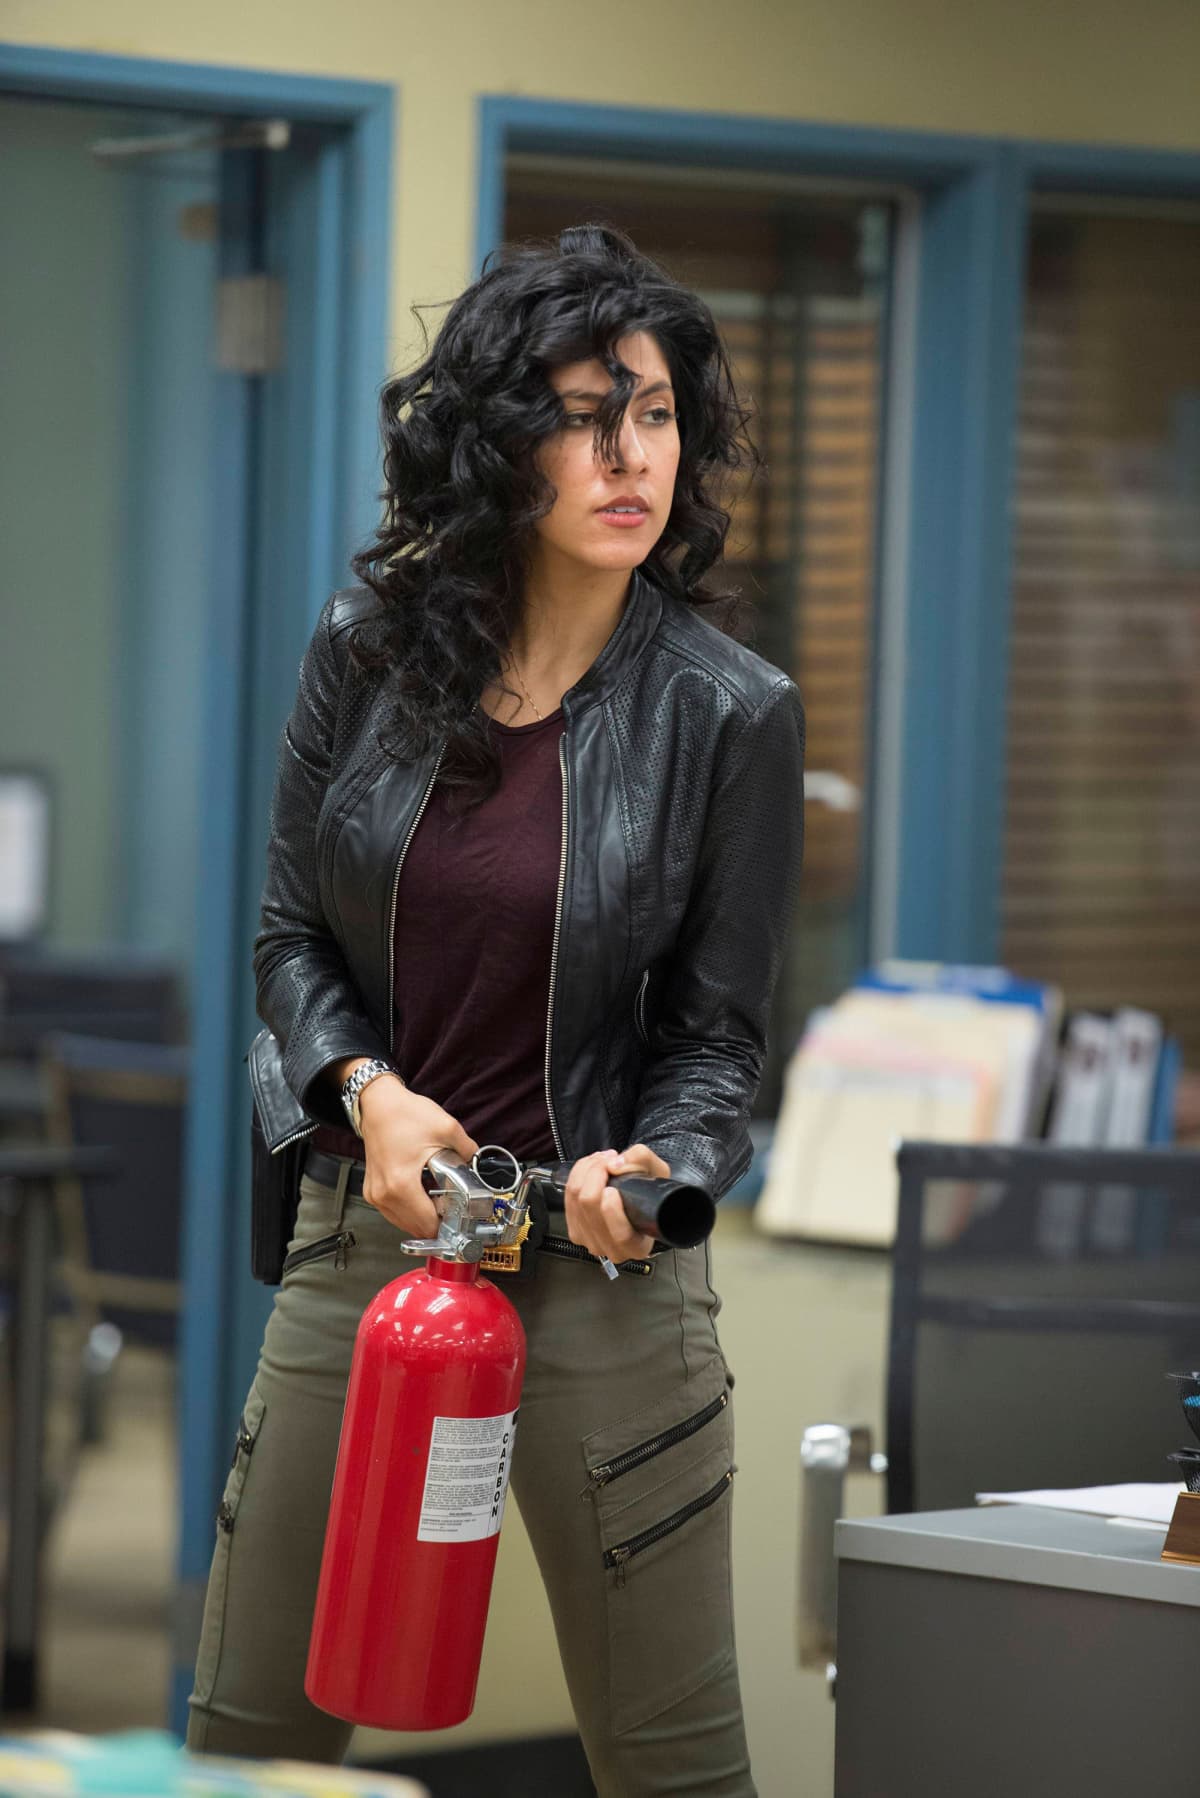 BROOKLYN NINE-NINE: Stephanie Beatriz in the "Operation: Broken Feather" episode of BROOKLYN NINE-NINE airing after NEW GIRL on Super Bowl night, Sunday, Feb. 2, 2014 (approx. 11:00-11:30 PM ET/8:00-8:30 PM PT) on FOX. (Photo by FOX Image Collection via Getty Images)